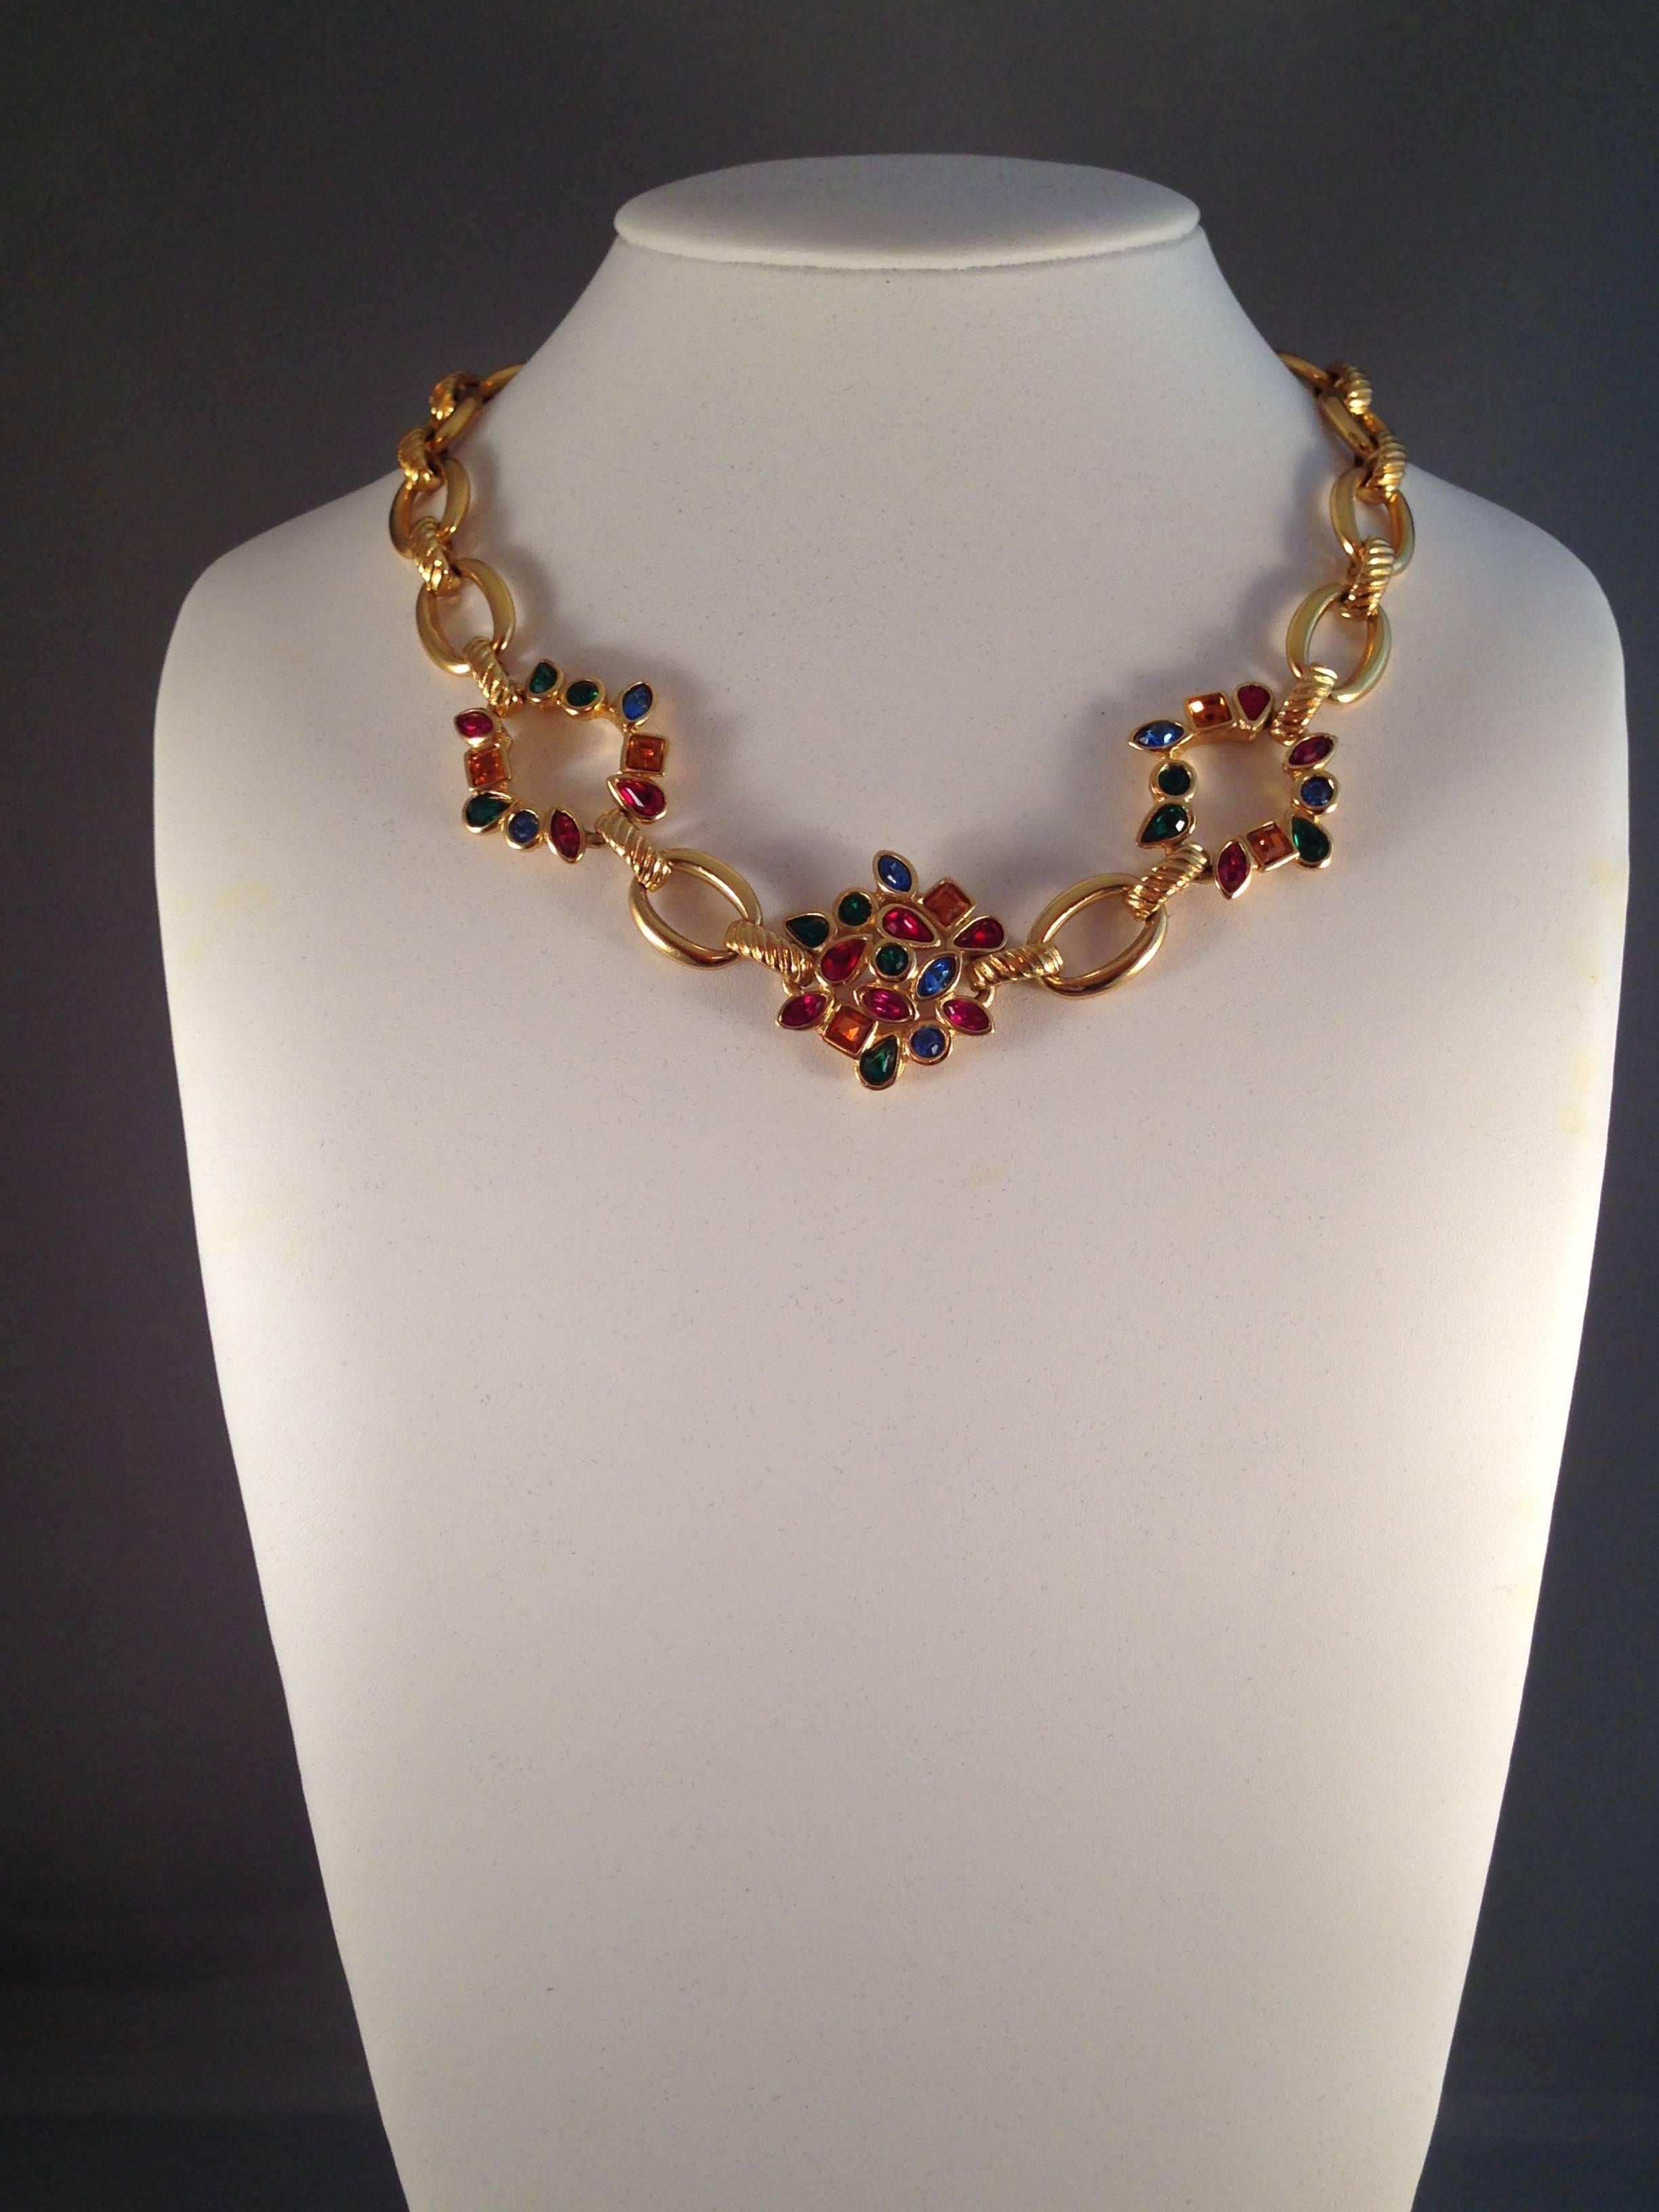 Yves Saint Laurent YSL Vintage Goldtone Necklace with Multi-Colored Stones In Excellent Condition For Sale In Chicago, IL